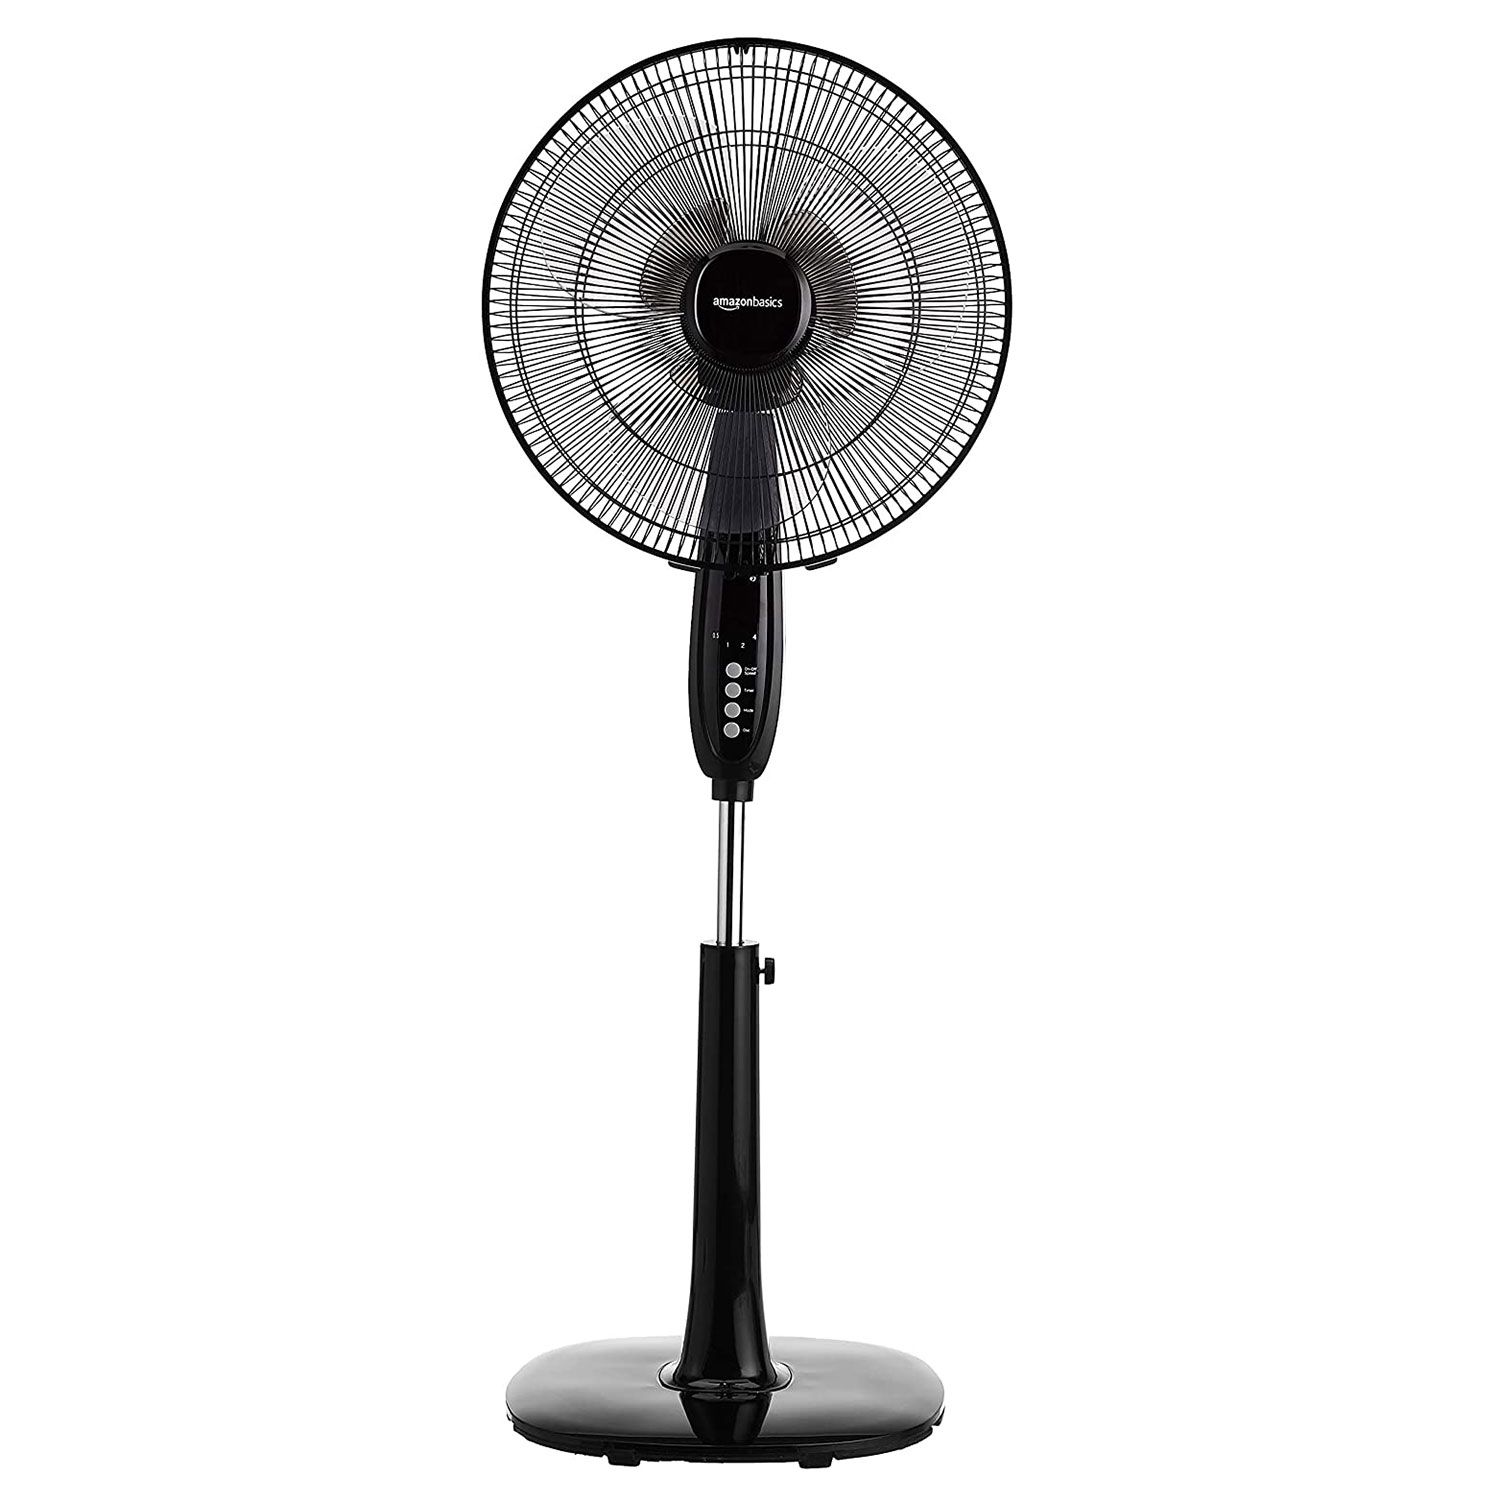 Amazon Basics Oscillating Dual Blade Standing Pedestal Fan with Remote